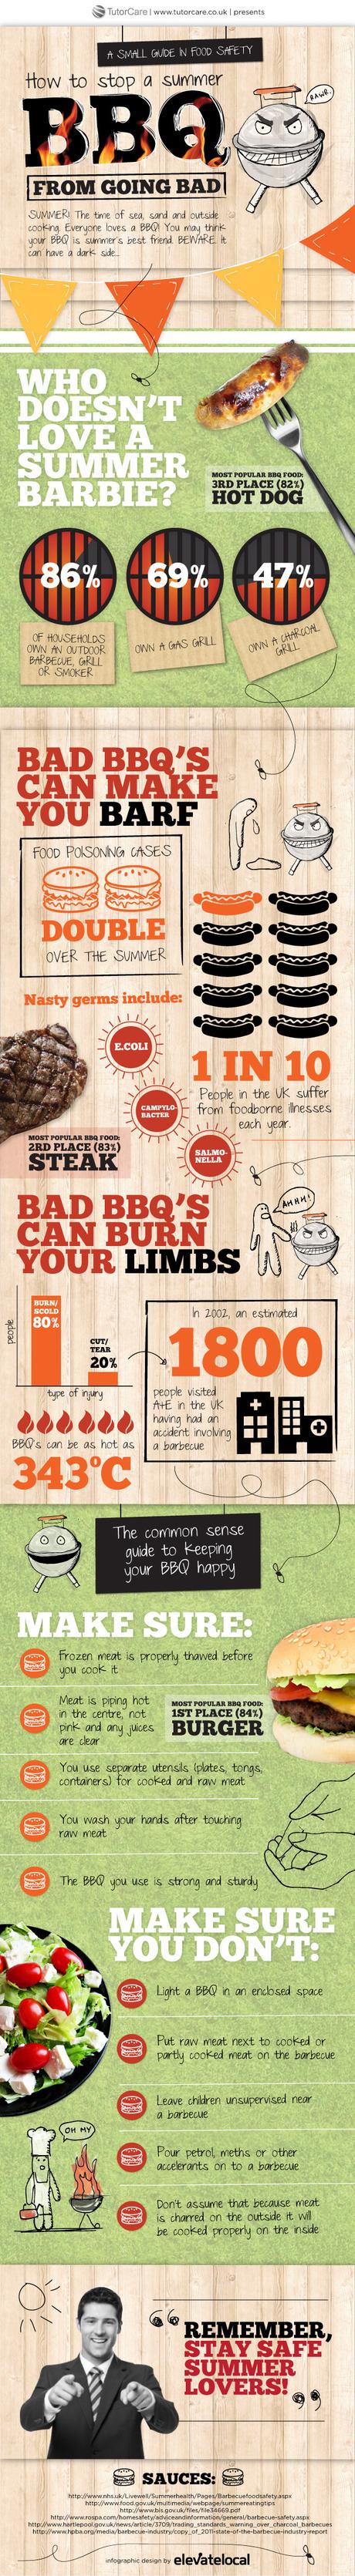 BBQ food safety infographic